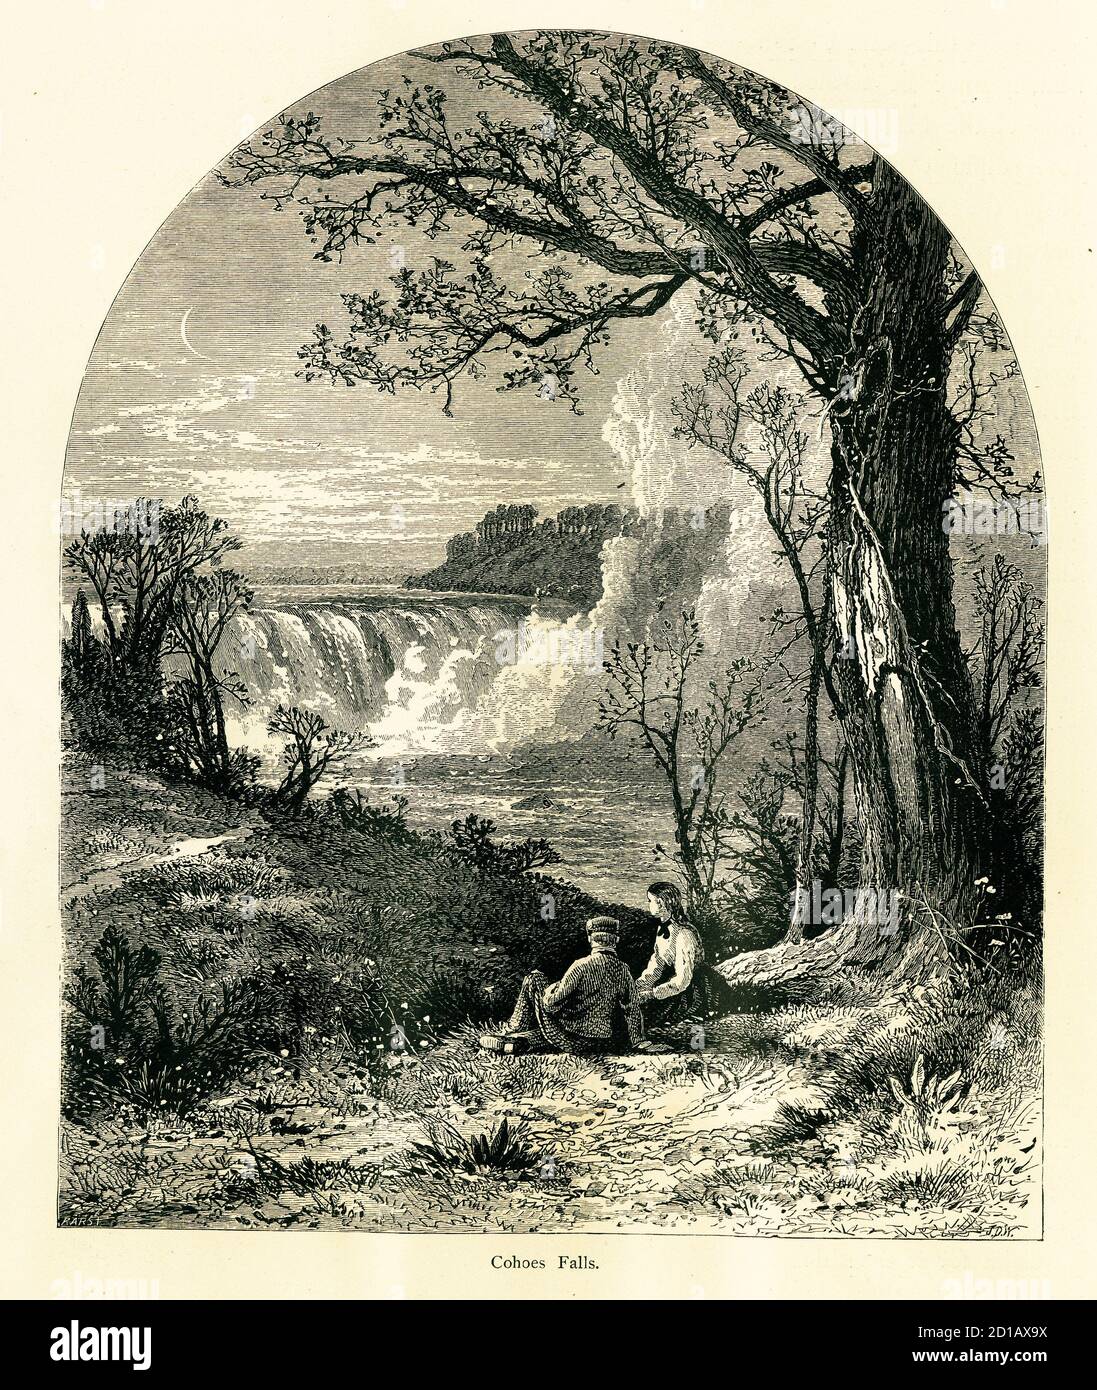 Antique engraving of Cohoes Falls, a waterfall on the Mohawk River in the U.S. state of New York. Illustration published in Picturesque America or the Stock Photo